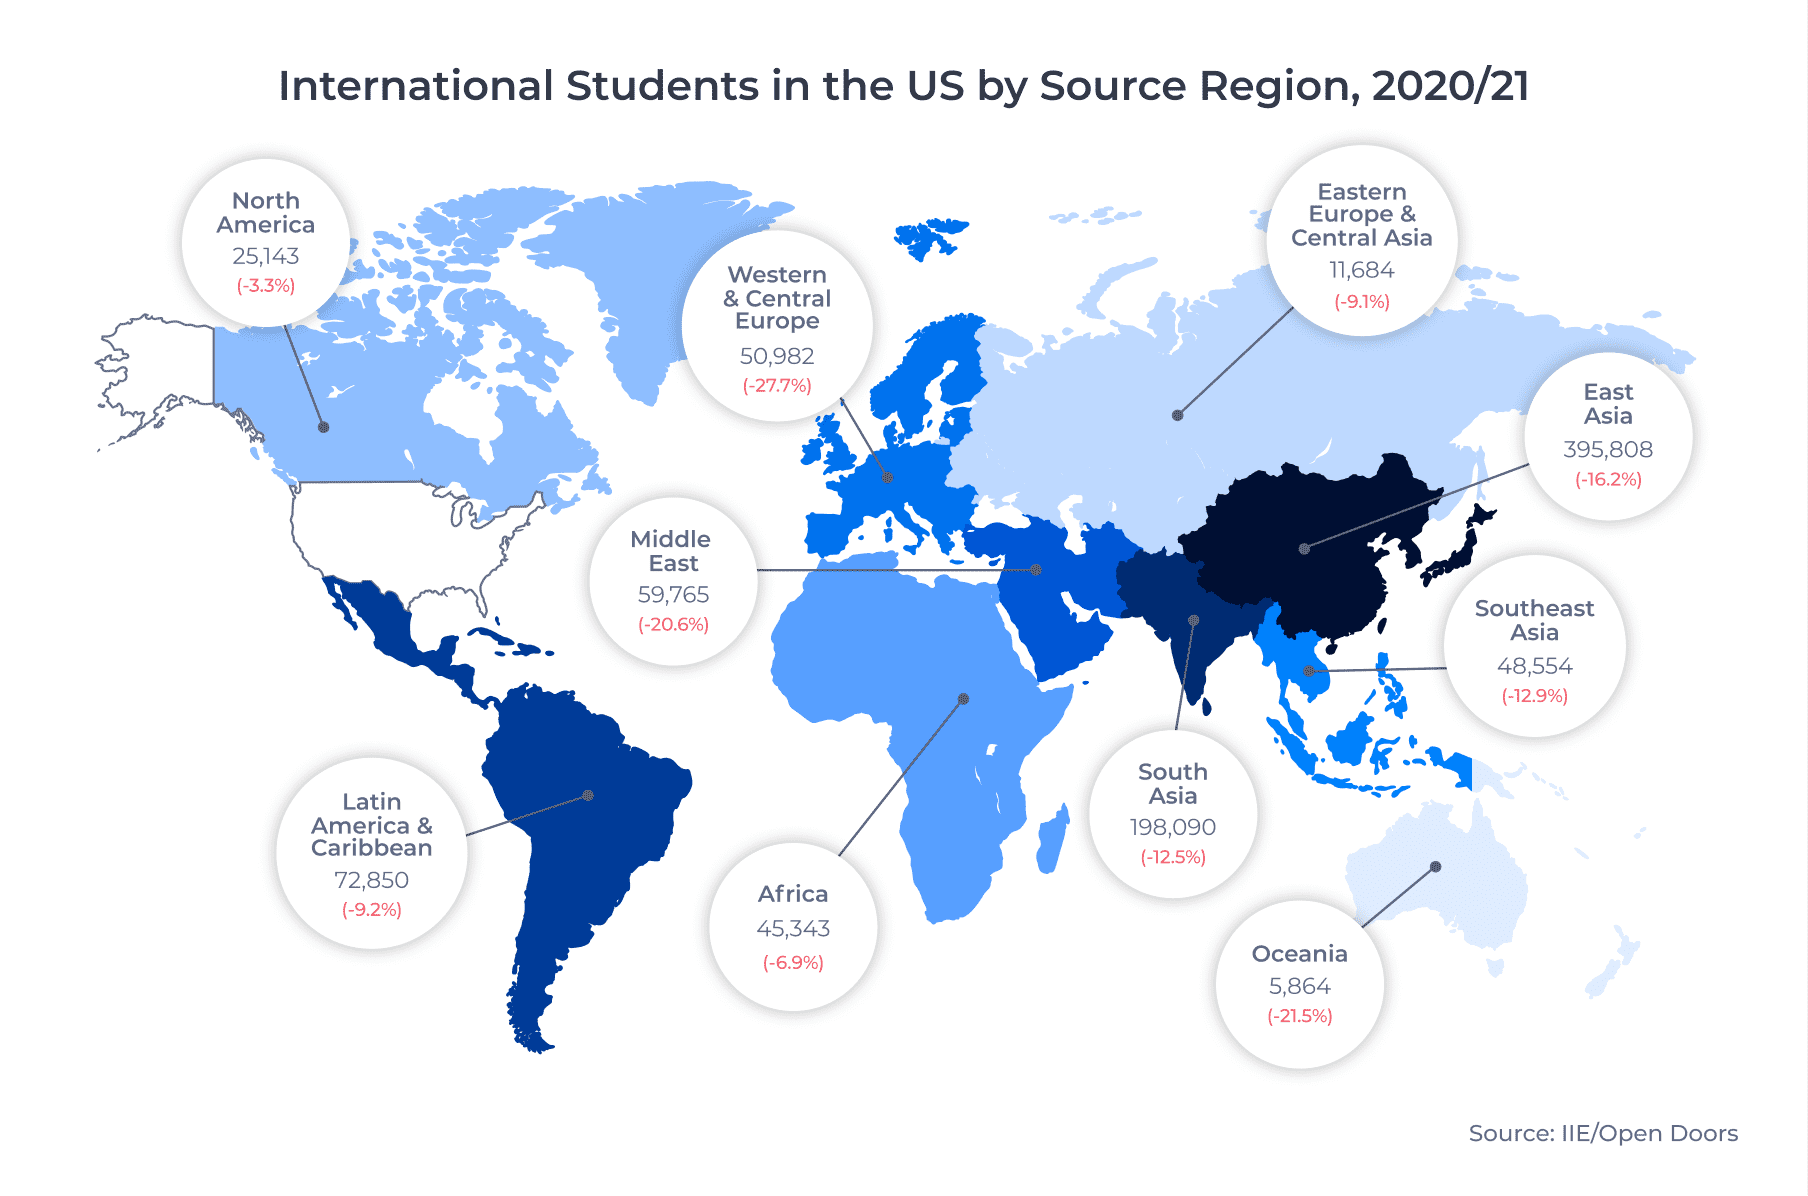 World map showing the decline in international students in the US by source region. Explored in more detail below.